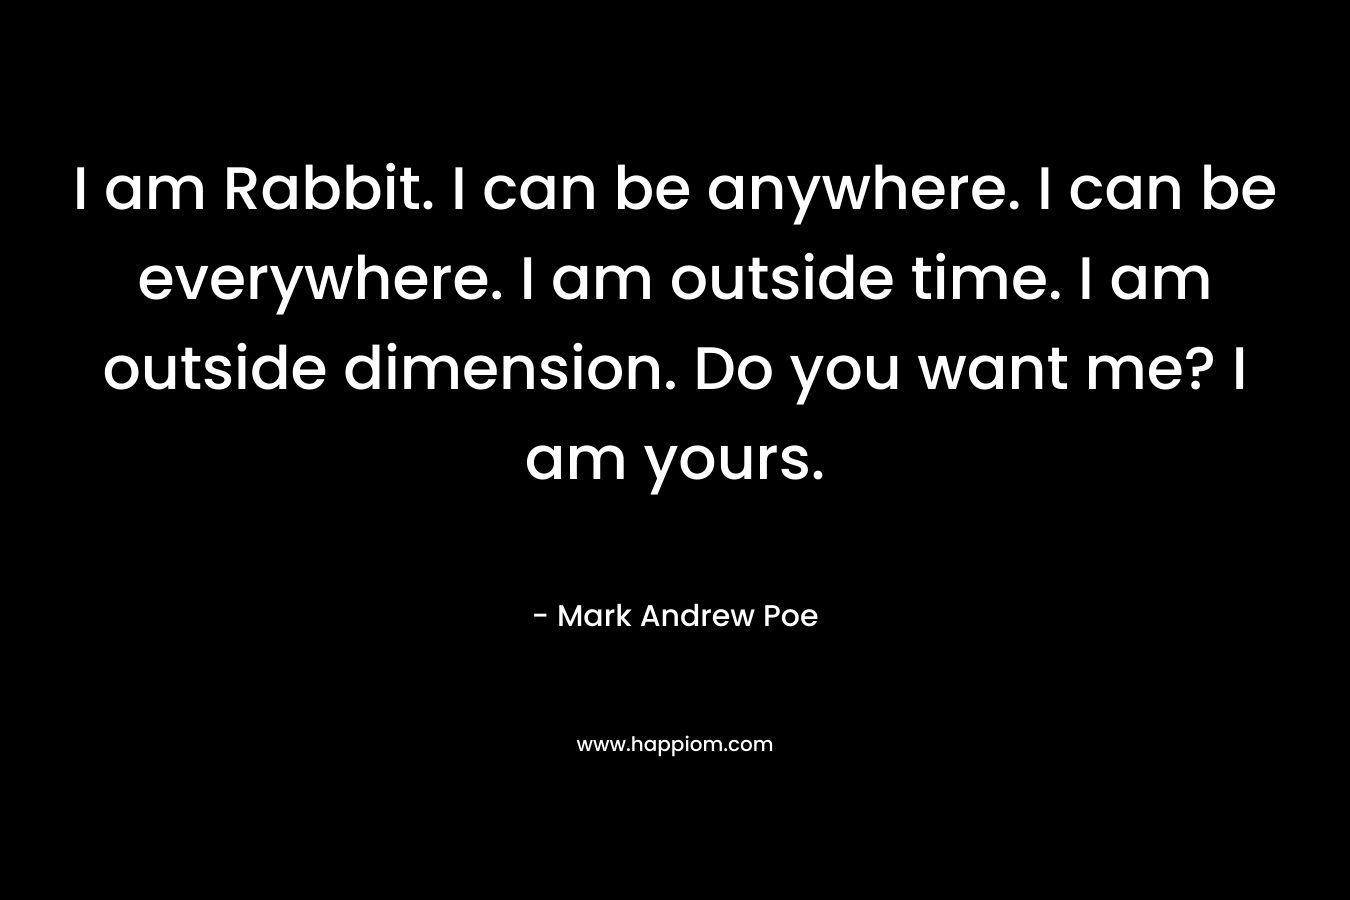 I am Rabbit. I can be anywhere. I can be everywhere. I am outside time. I am outside dimension. Do you want me? I am yours. – Mark Andrew Poe